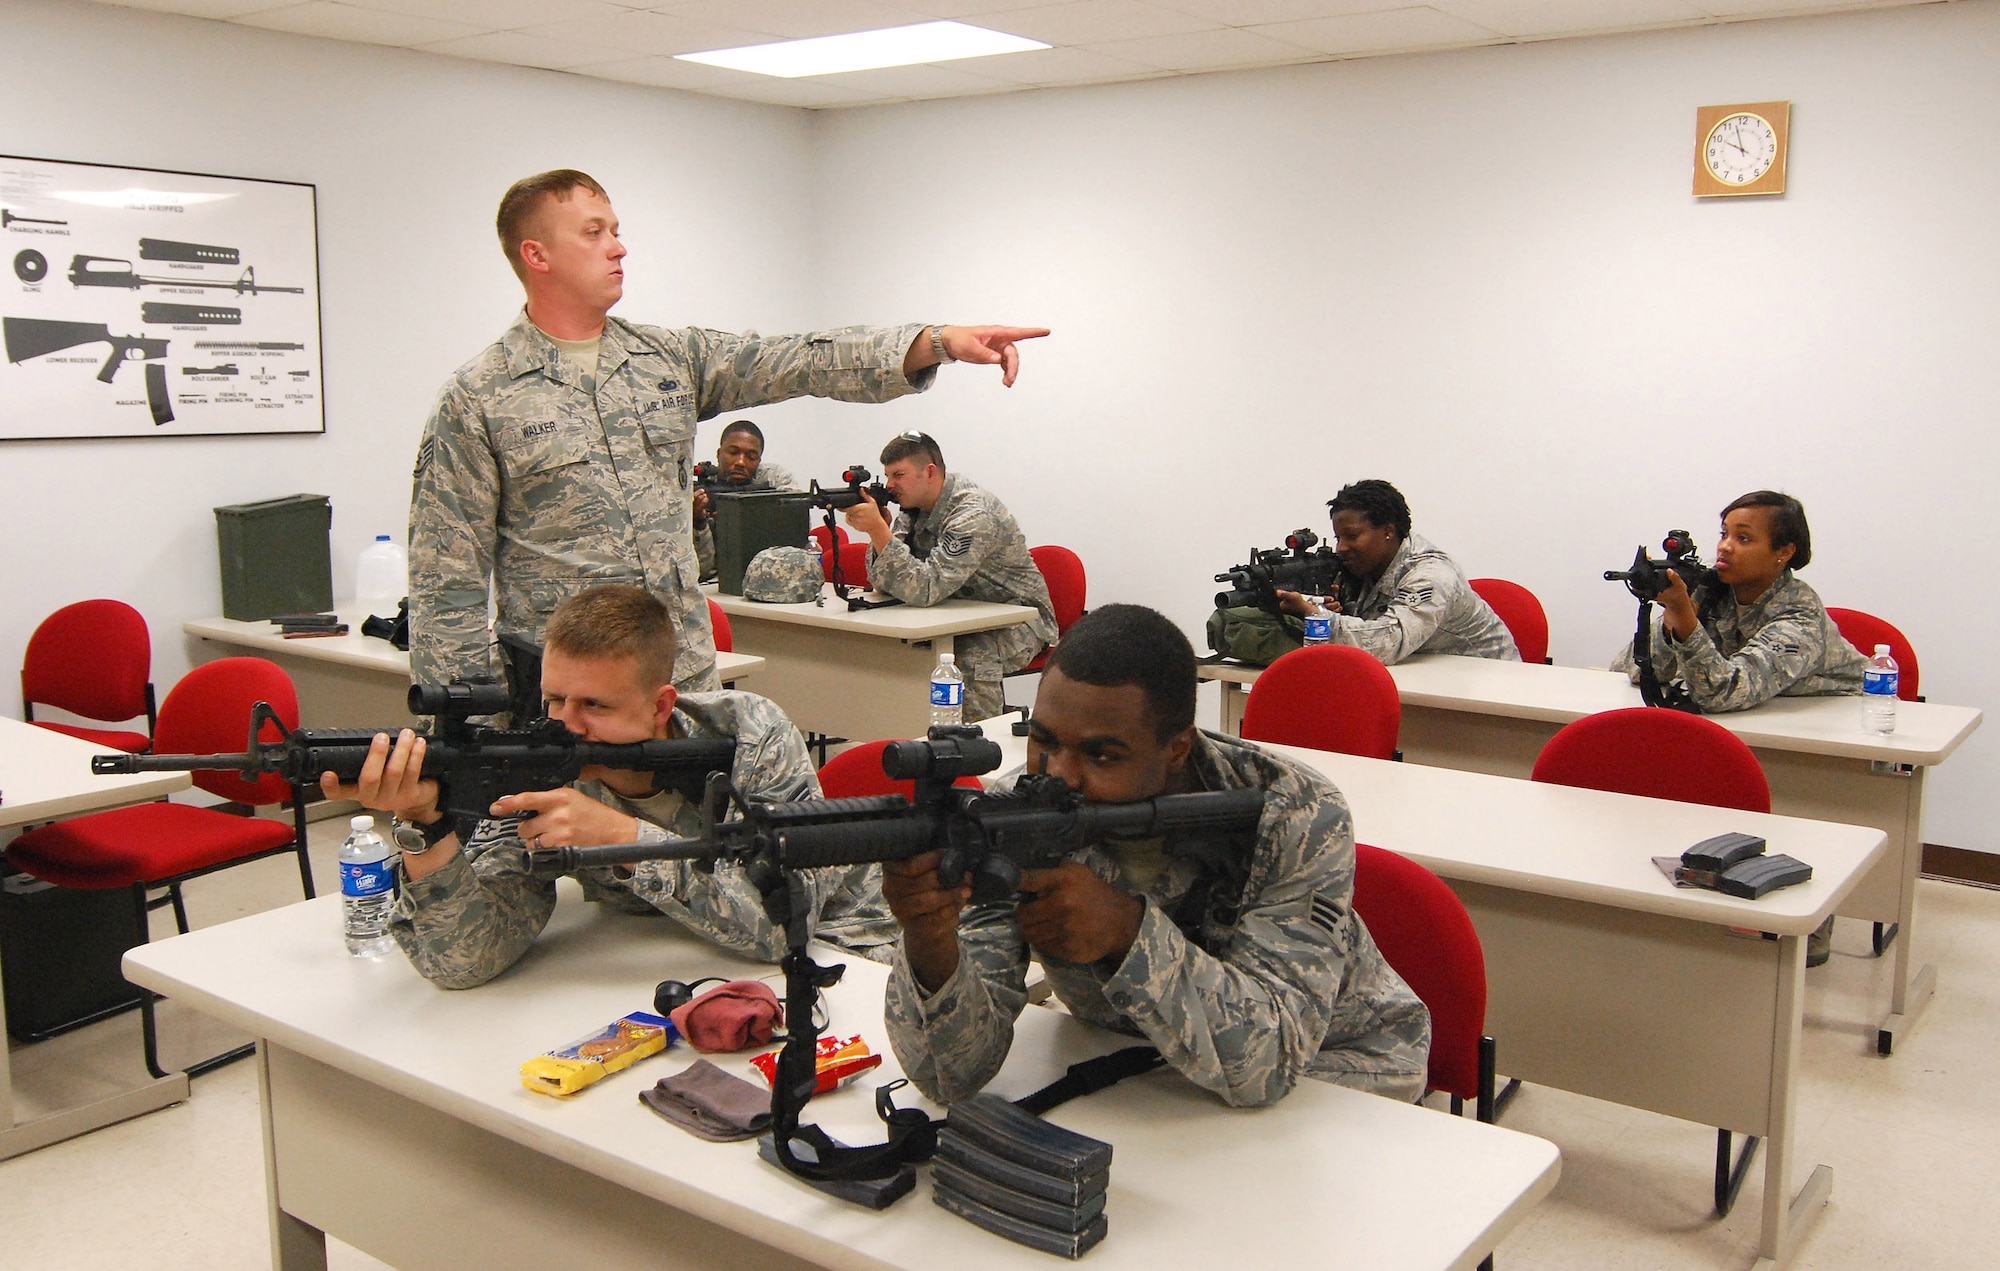 Staff Sgt. Sean Walker, 94th Security Forces Squadron, provides classroom instruction on the M-4 carbine for Security Forces Airmen at Dobbins Air Reserve Base during the monthly Unit Training Assembly, July 9.  94th Security Forces Combat Arms Training and Maintenance instructors conduct the training with several hours of classroom and firing range instruction ending with a qualification course of fire.  (U.S. Air Force photo/ Brad Fallin)